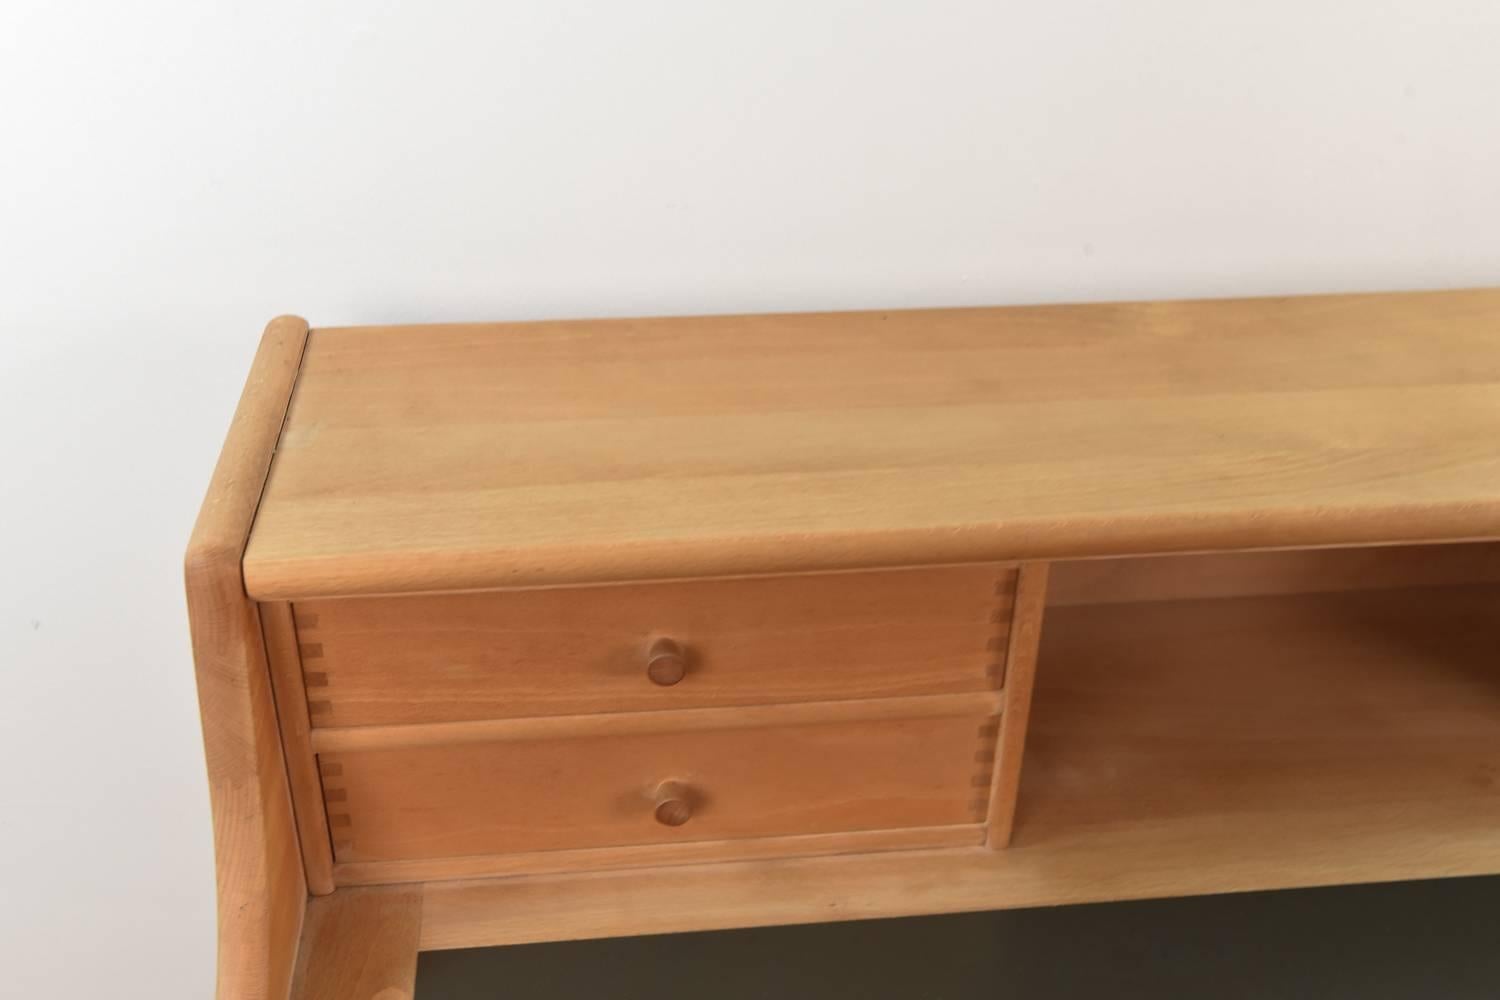 This model 50 desk by Andreas Hansen features an inset leather writing top and a frame of beech wood. There are two larger drawers underneath and four smaller drawers and a compartment above, providing great storage and organization spaces. Would be